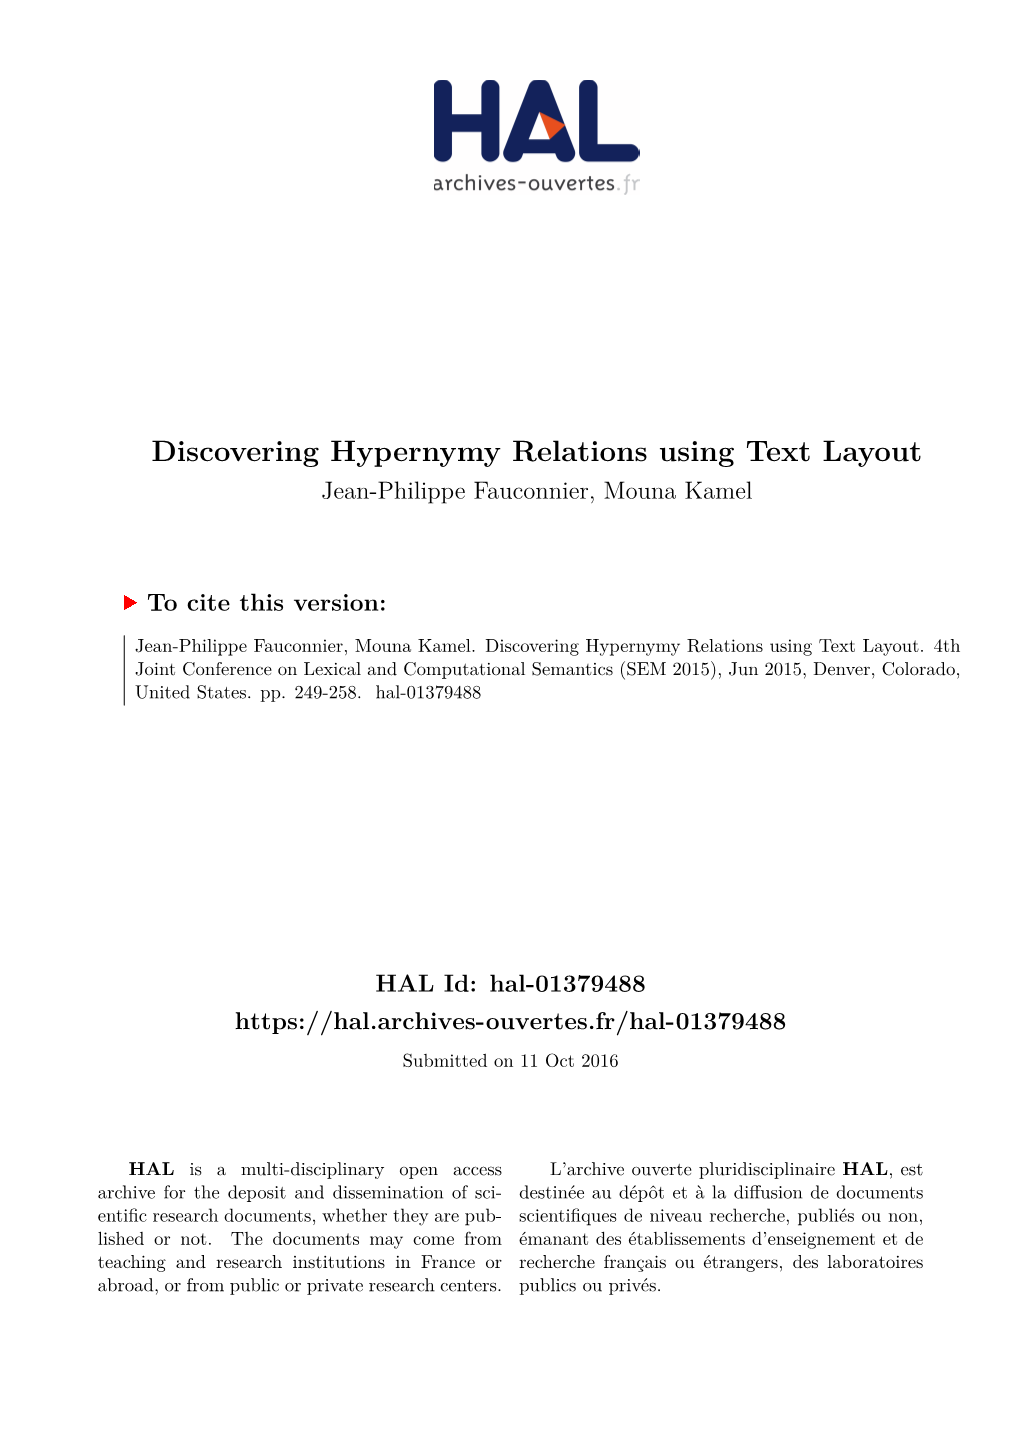 Discovering Hypernymy Relations Using Text Layout Jean-Philippe Fauconnier, Mouna Kamel